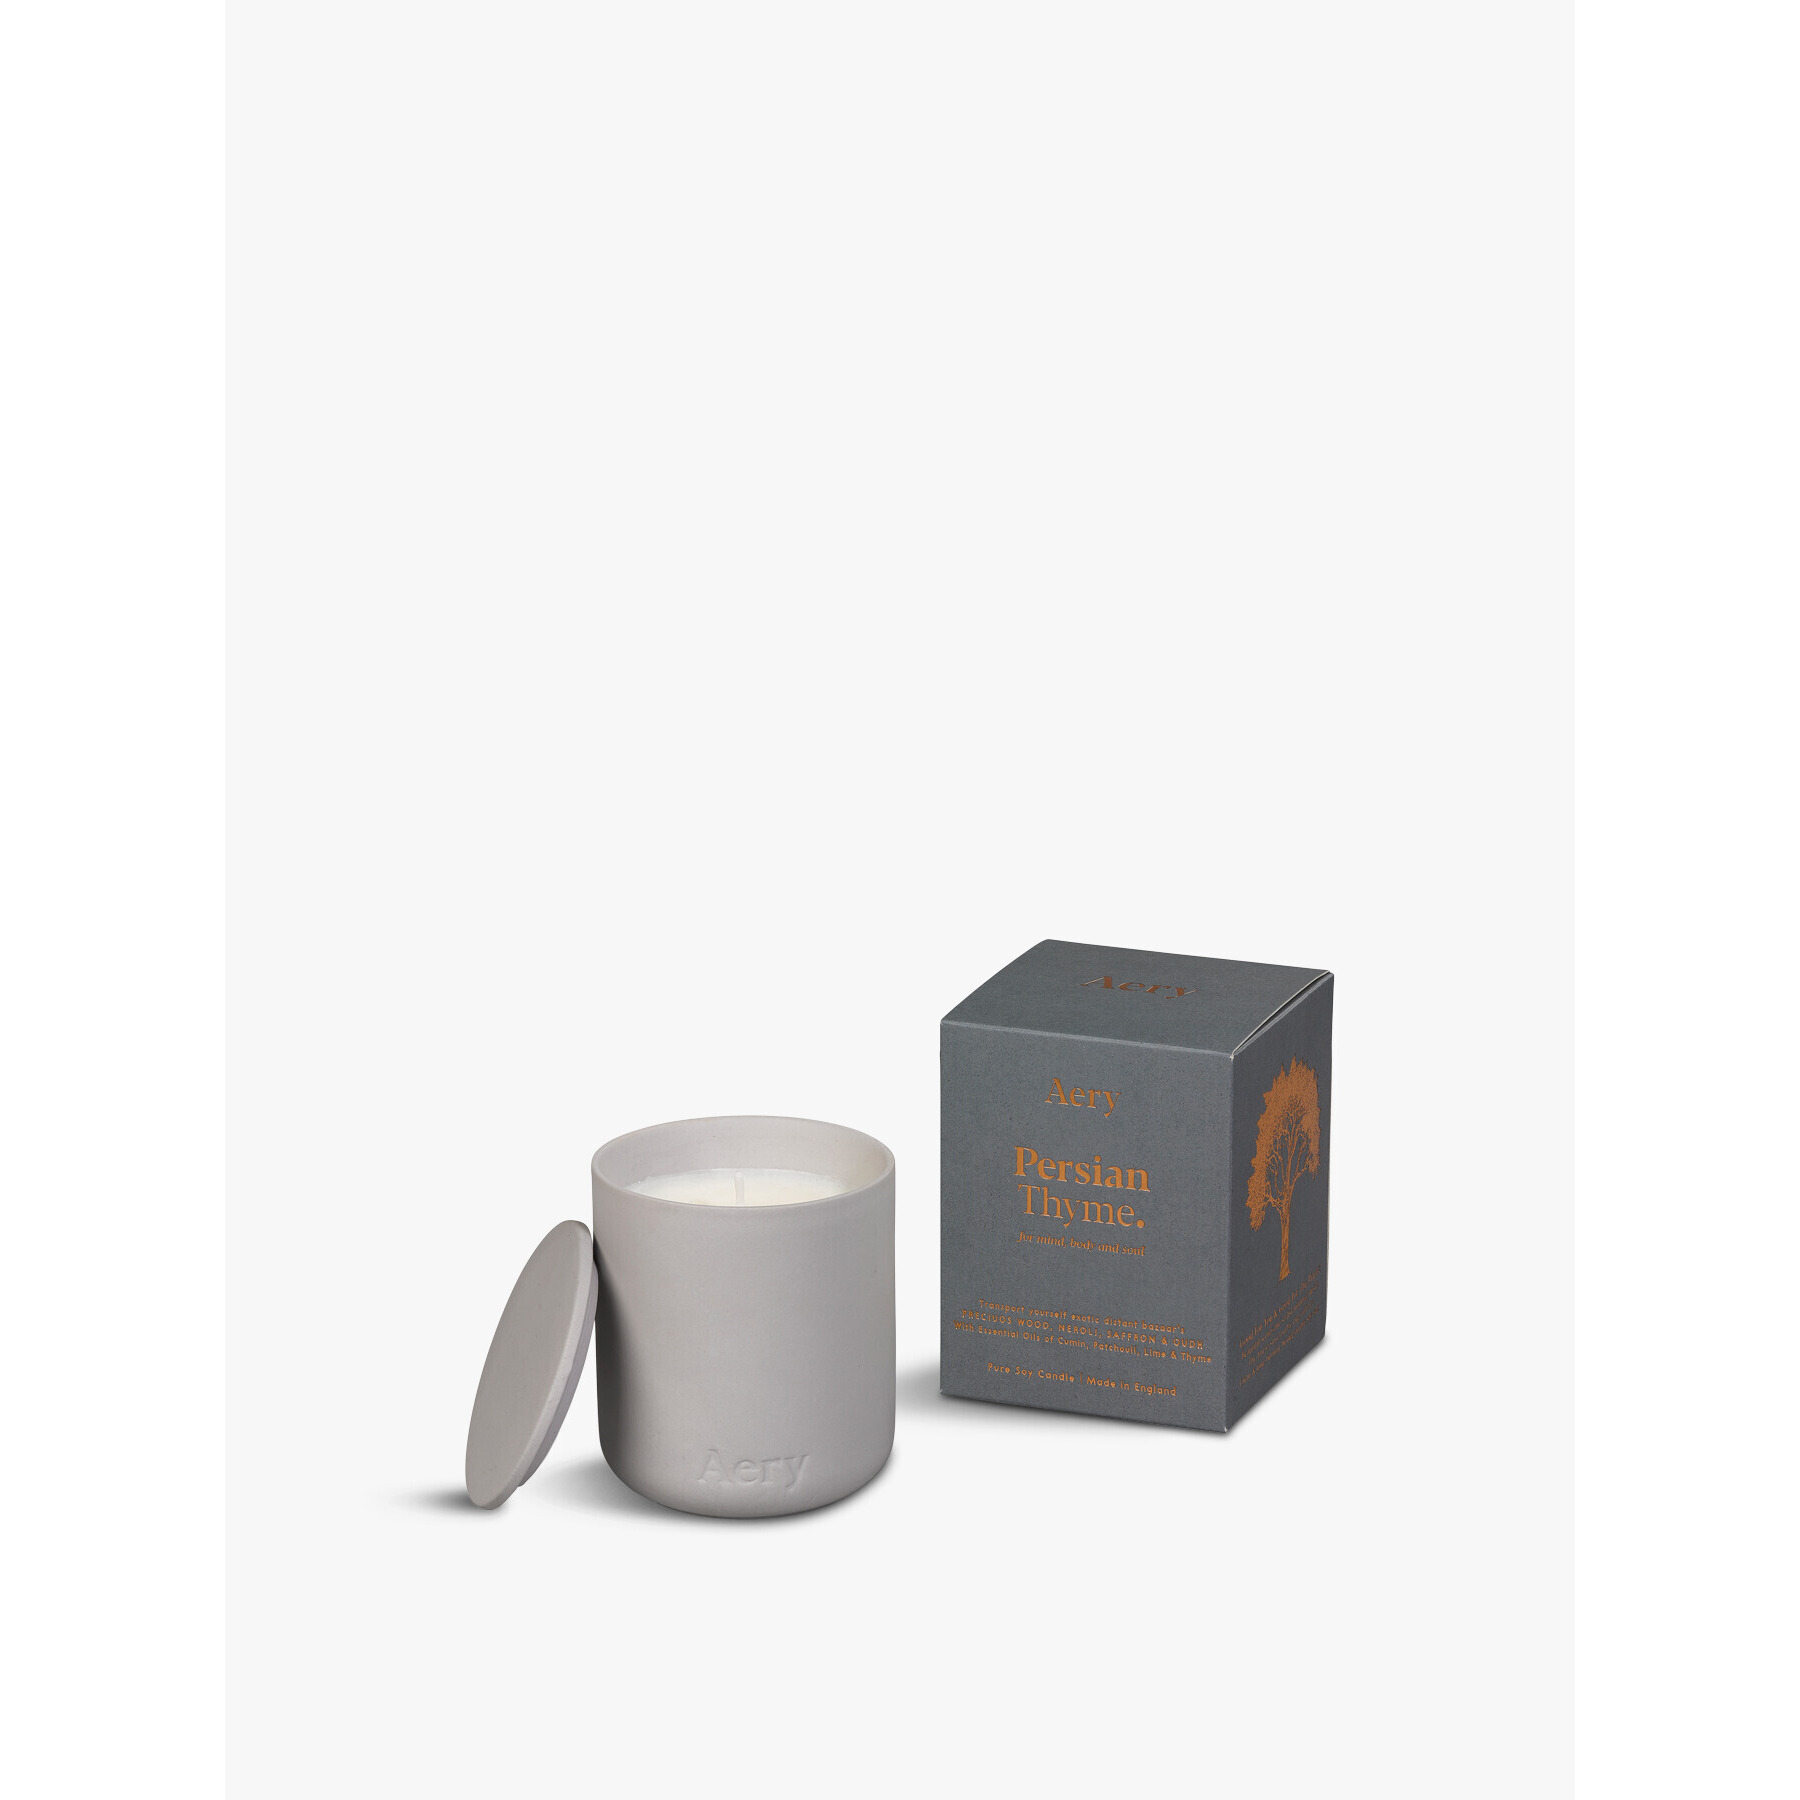 Aery Persian Thyme Fernweh Candles - image 1